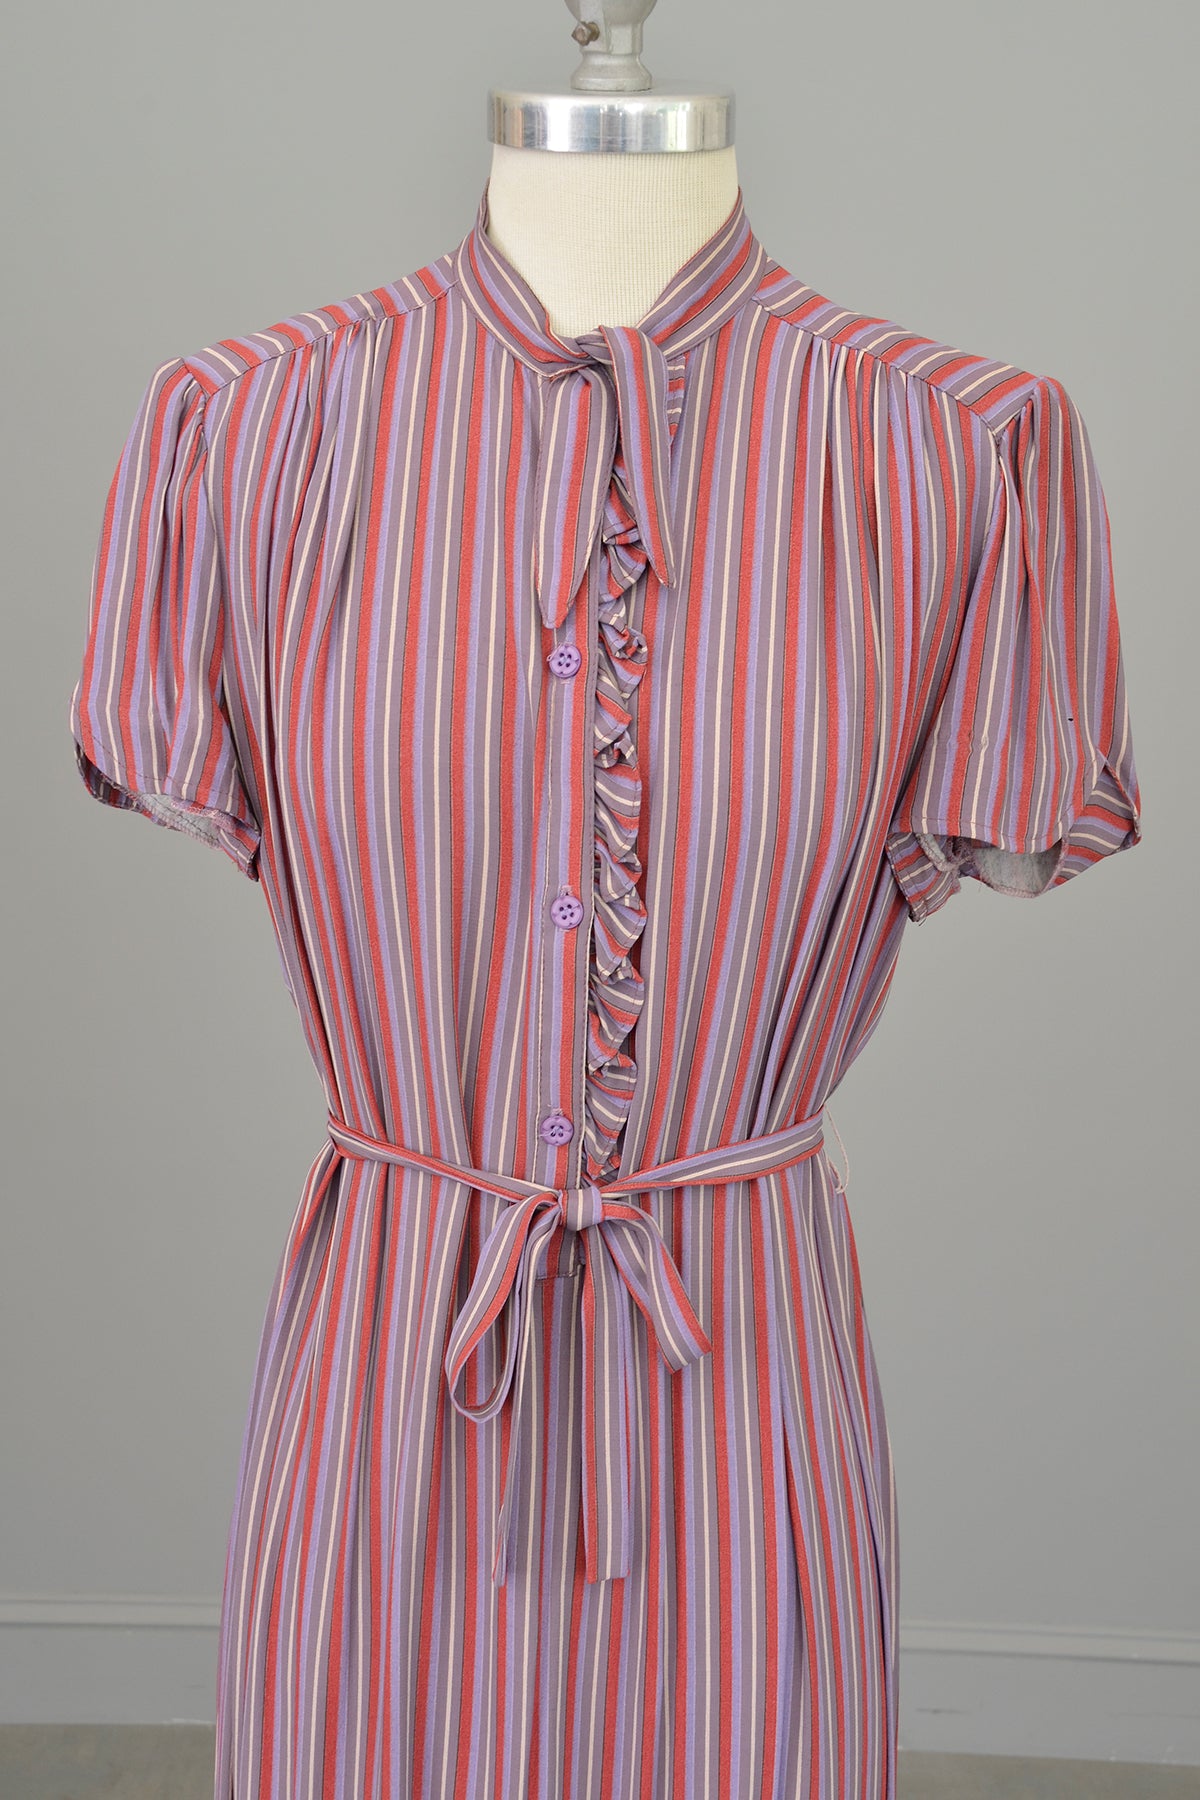 1970s Silky Striped Shift Dress with Ruffled Neckline by Belle France